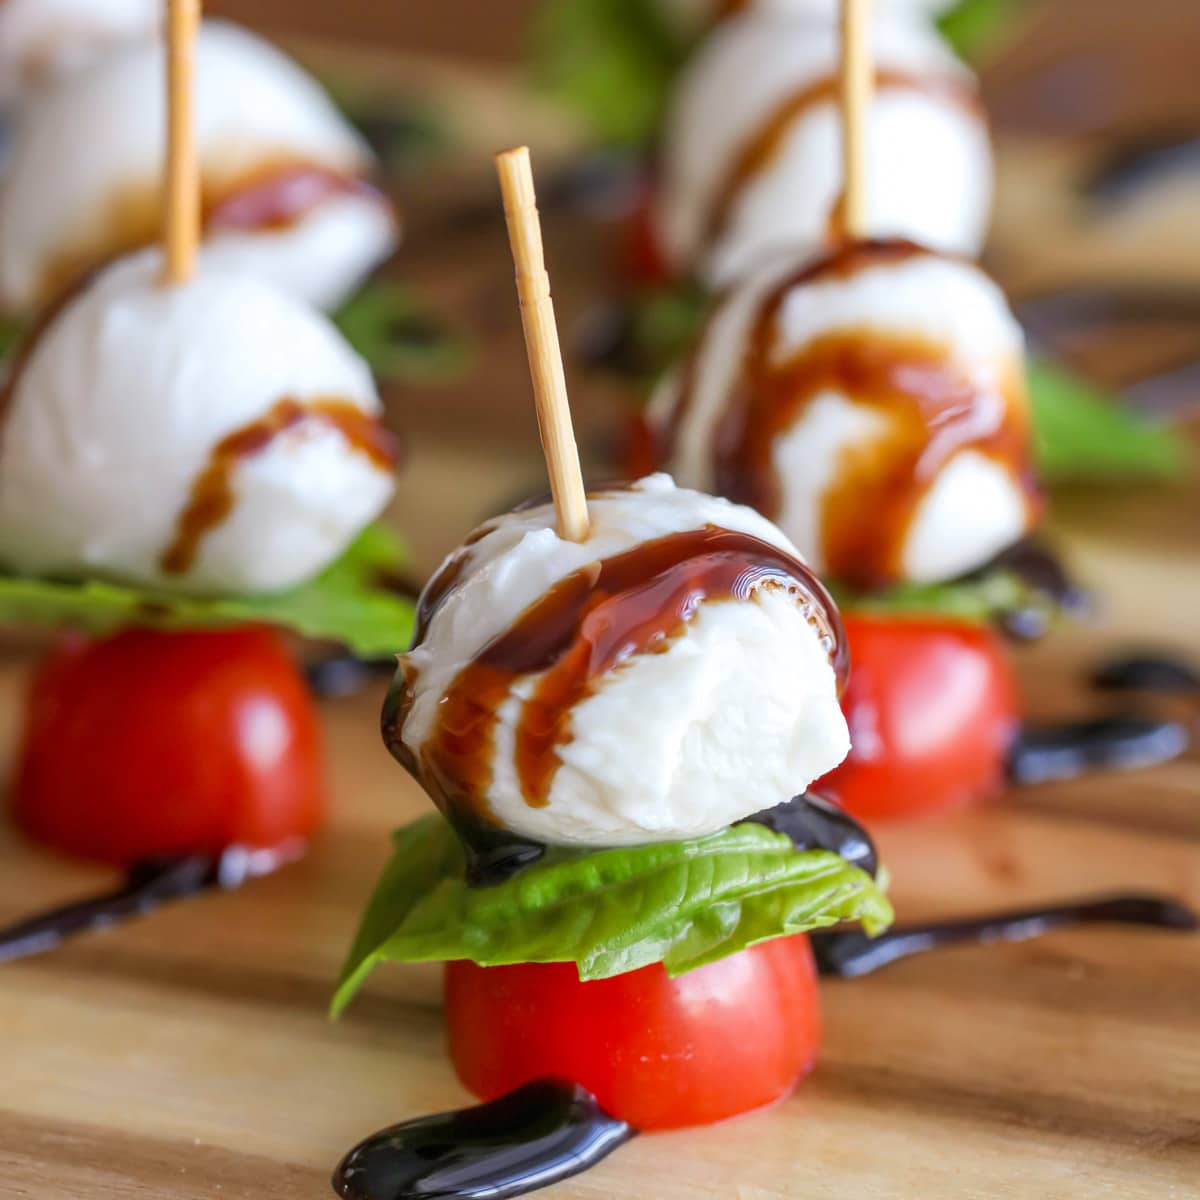 Party appetizers - caprese cabobs skewered with sticks.